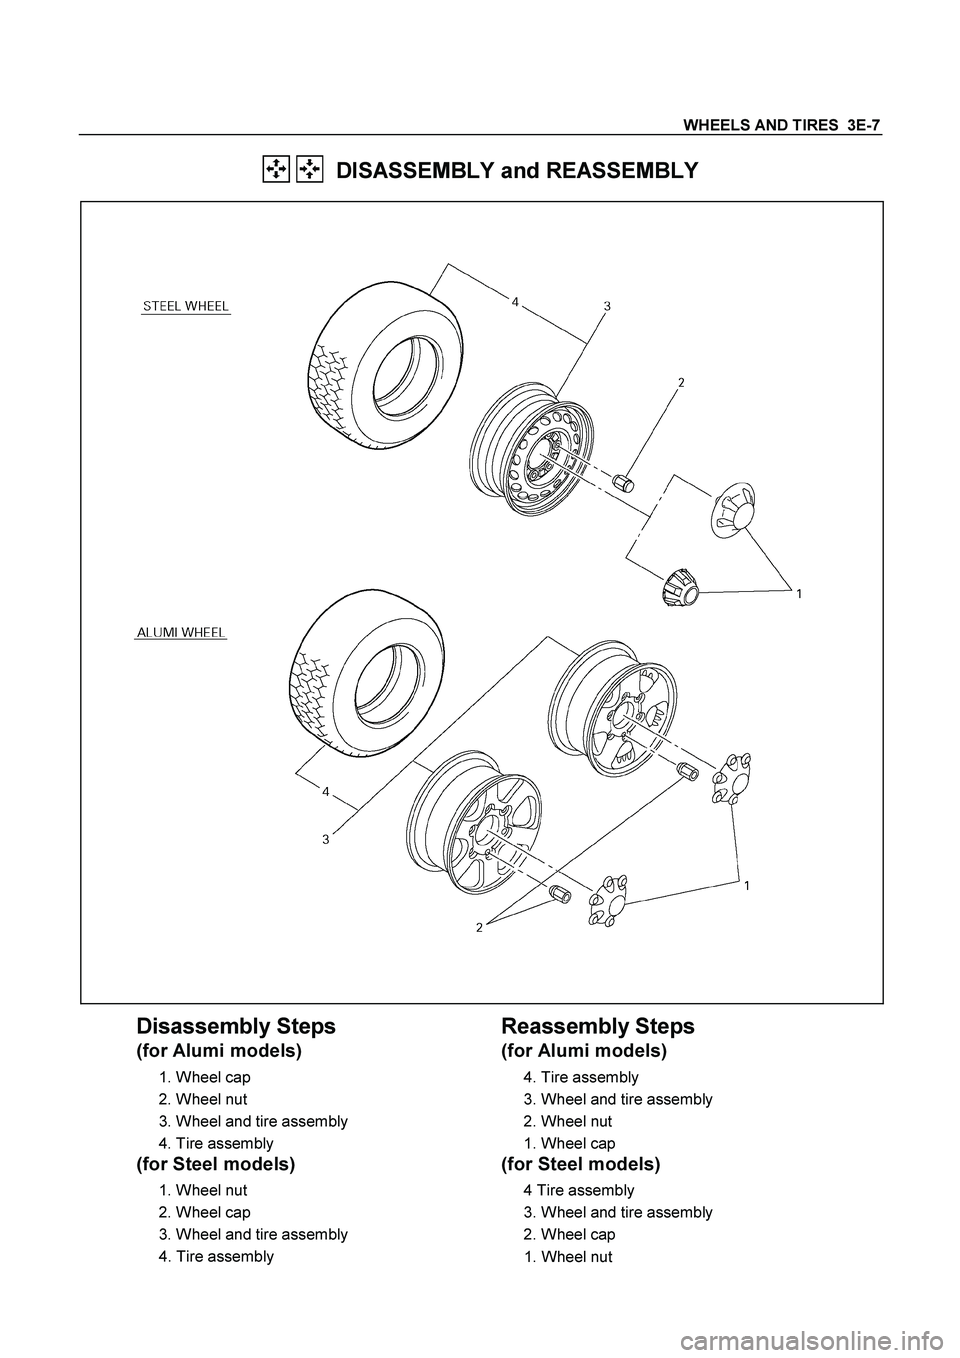 ISUZU TF SERIES 2004  Workshop Manual WHEELS AND TIRES  3E-7
 
   DISASSEMBLY and REASSEMBLY 
 
 
Disassembly Steps 
(for Alumi models) 
1. Wheel cap 
2. Wheel nut 
3. Wheel and tire assembly 
4. Tire assembly 
(for Steel models) 
1. Whee